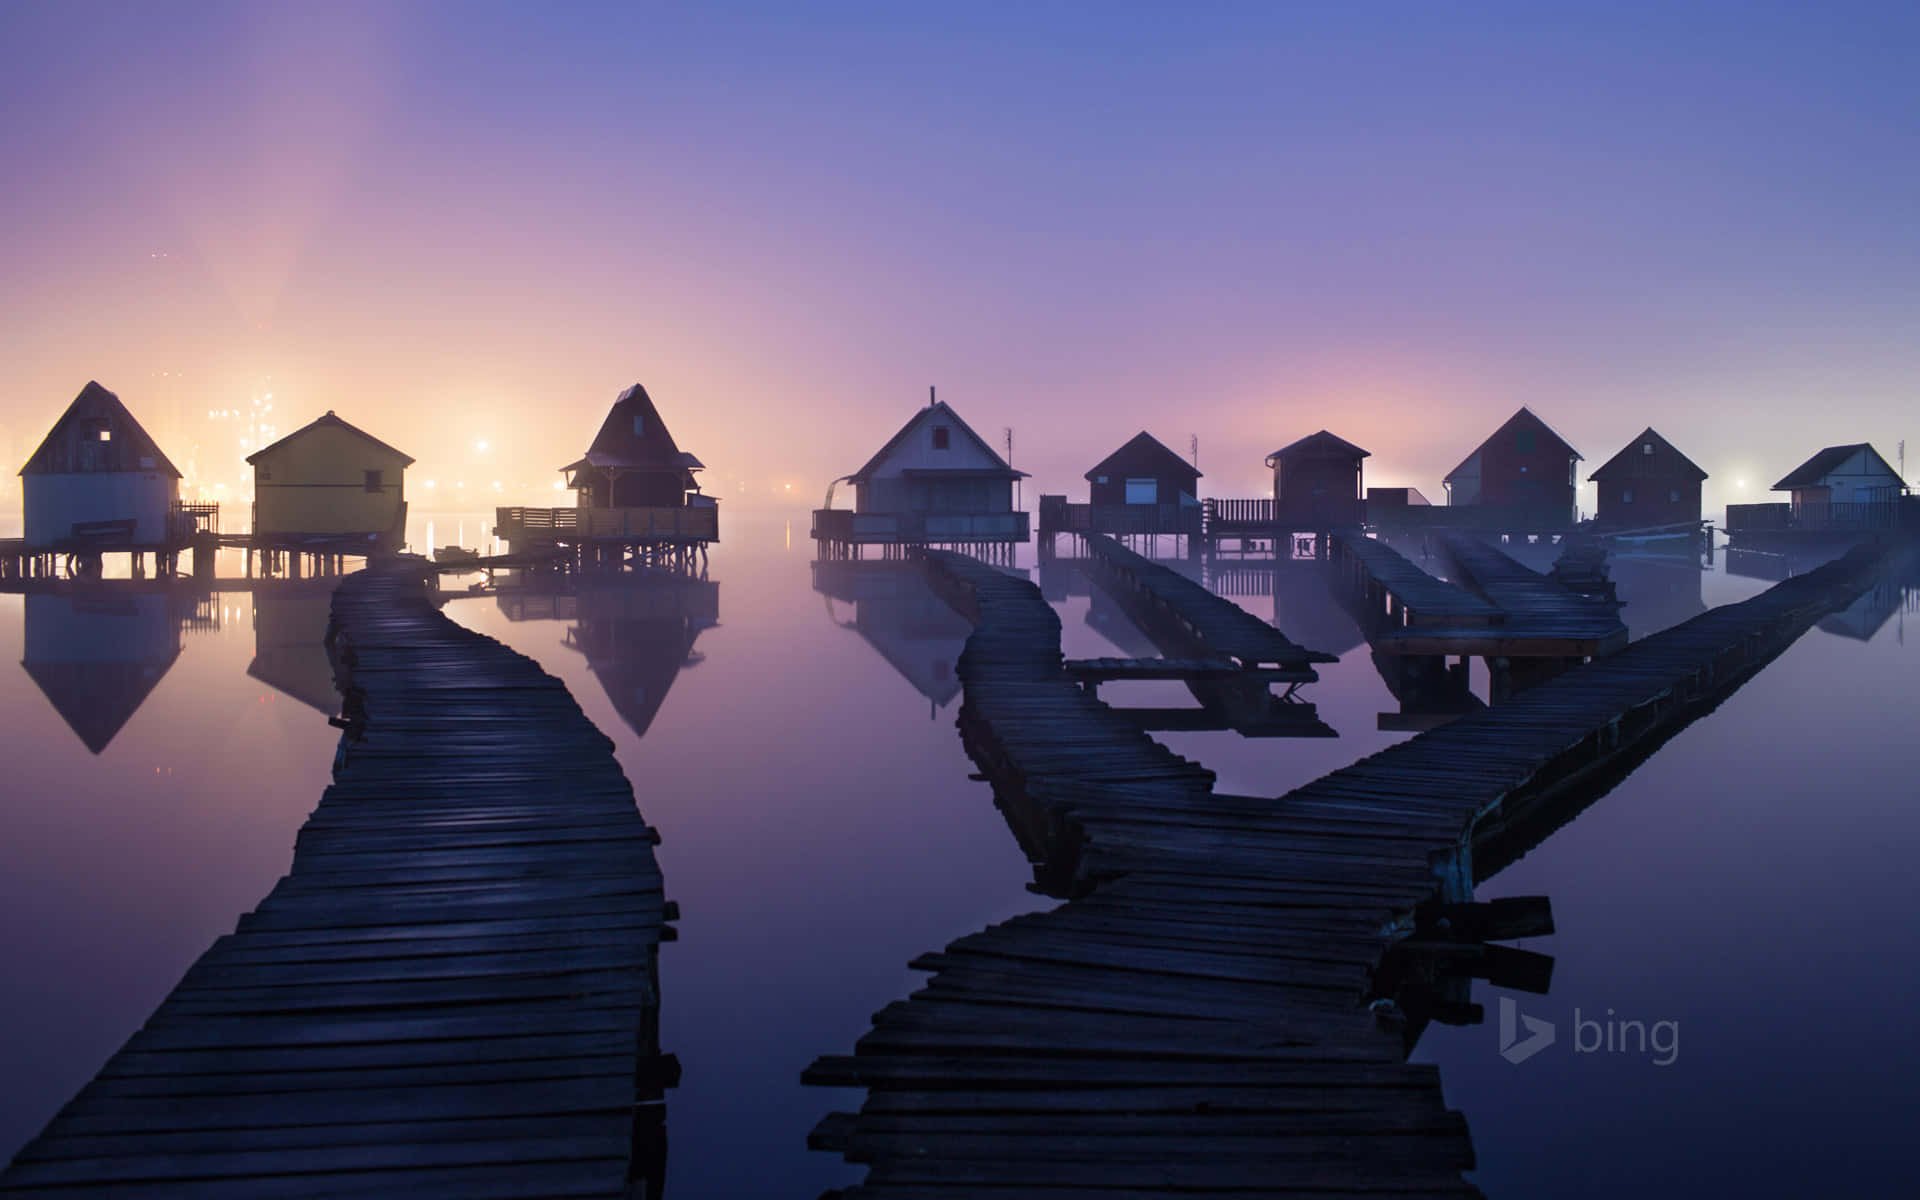 A Group Of Wooden Houses On A Dock In The Water